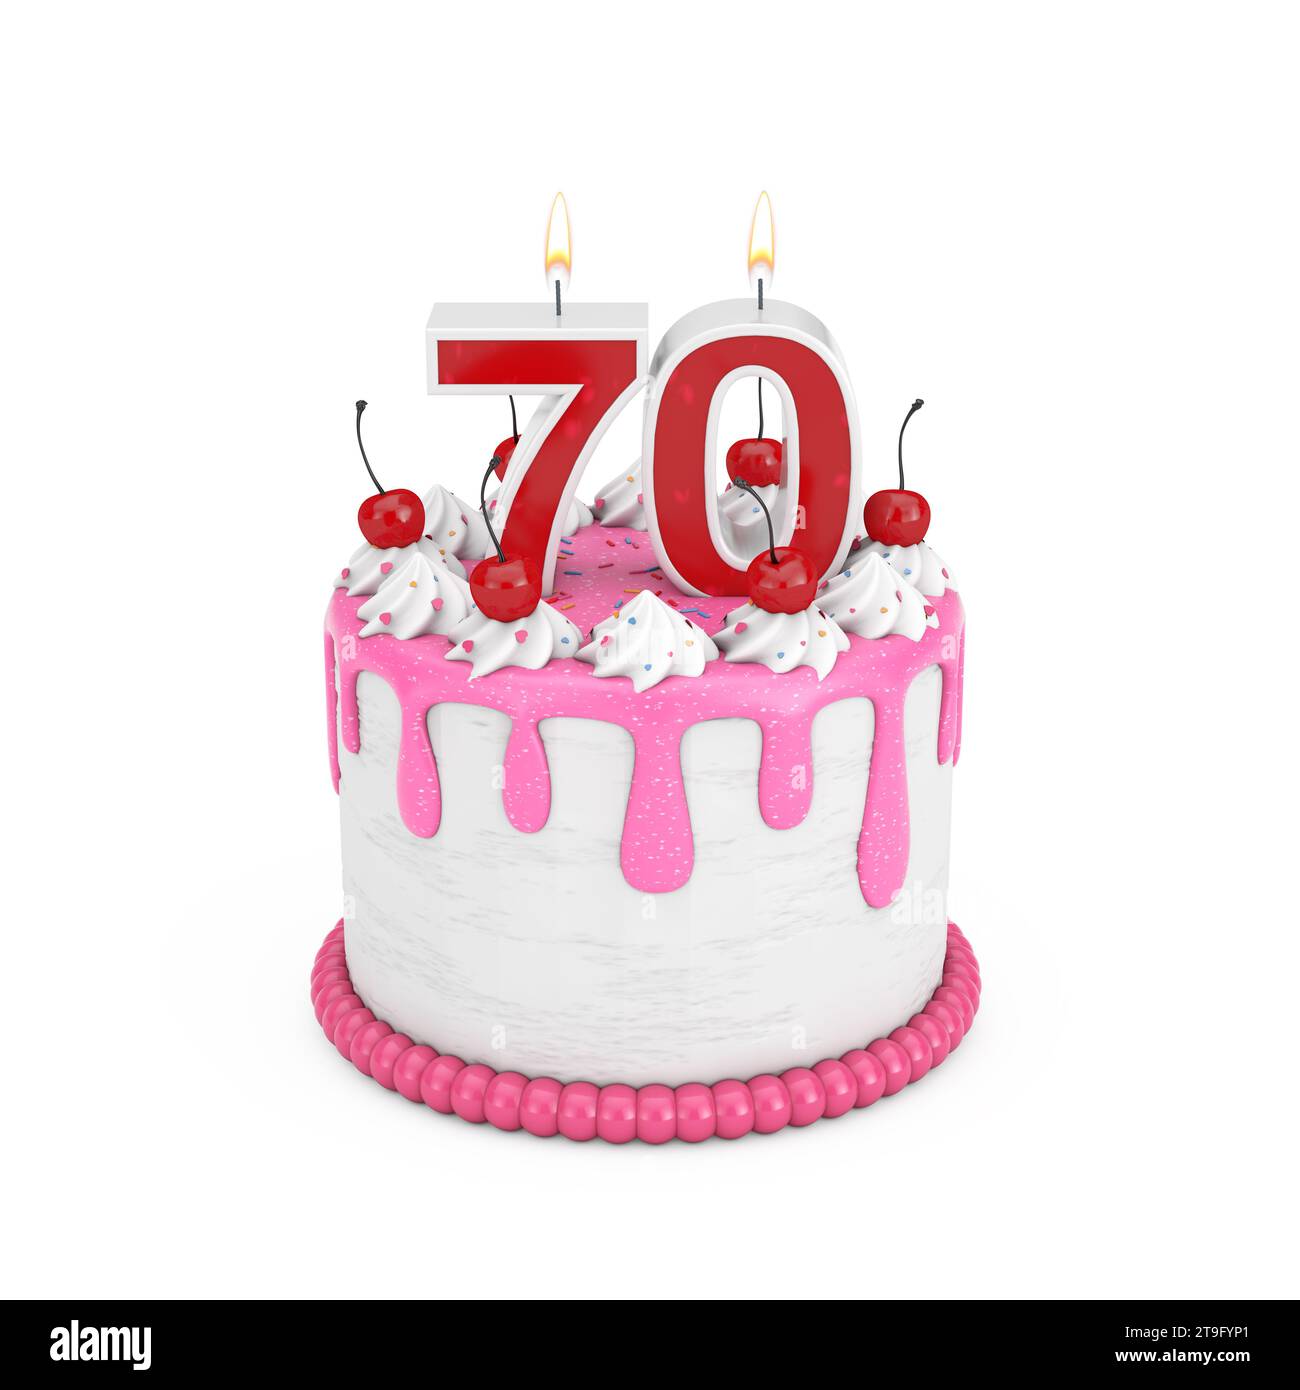 70 Year Birthday Concept. Abstract Birthday Cartoon Dessert Cherry Cake with Seventy Year Anniversary Candle on a white background. 3d Rendering Stock Photo